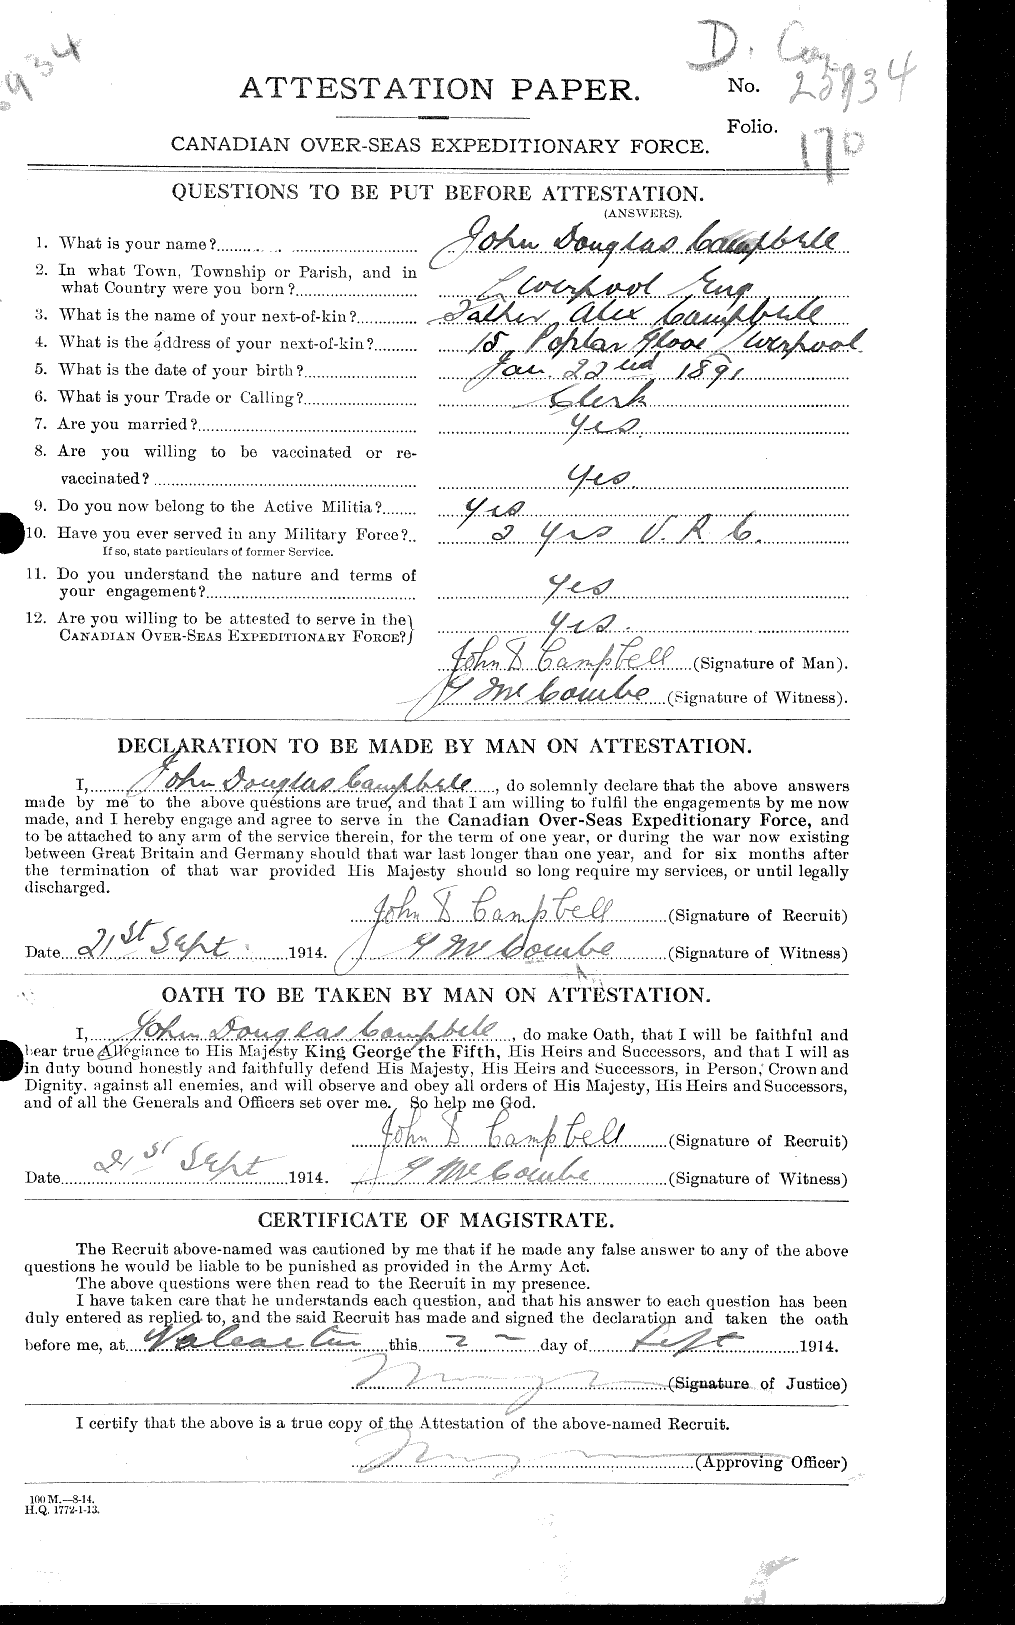 Personnel Records of the First World War - CEF 008504a